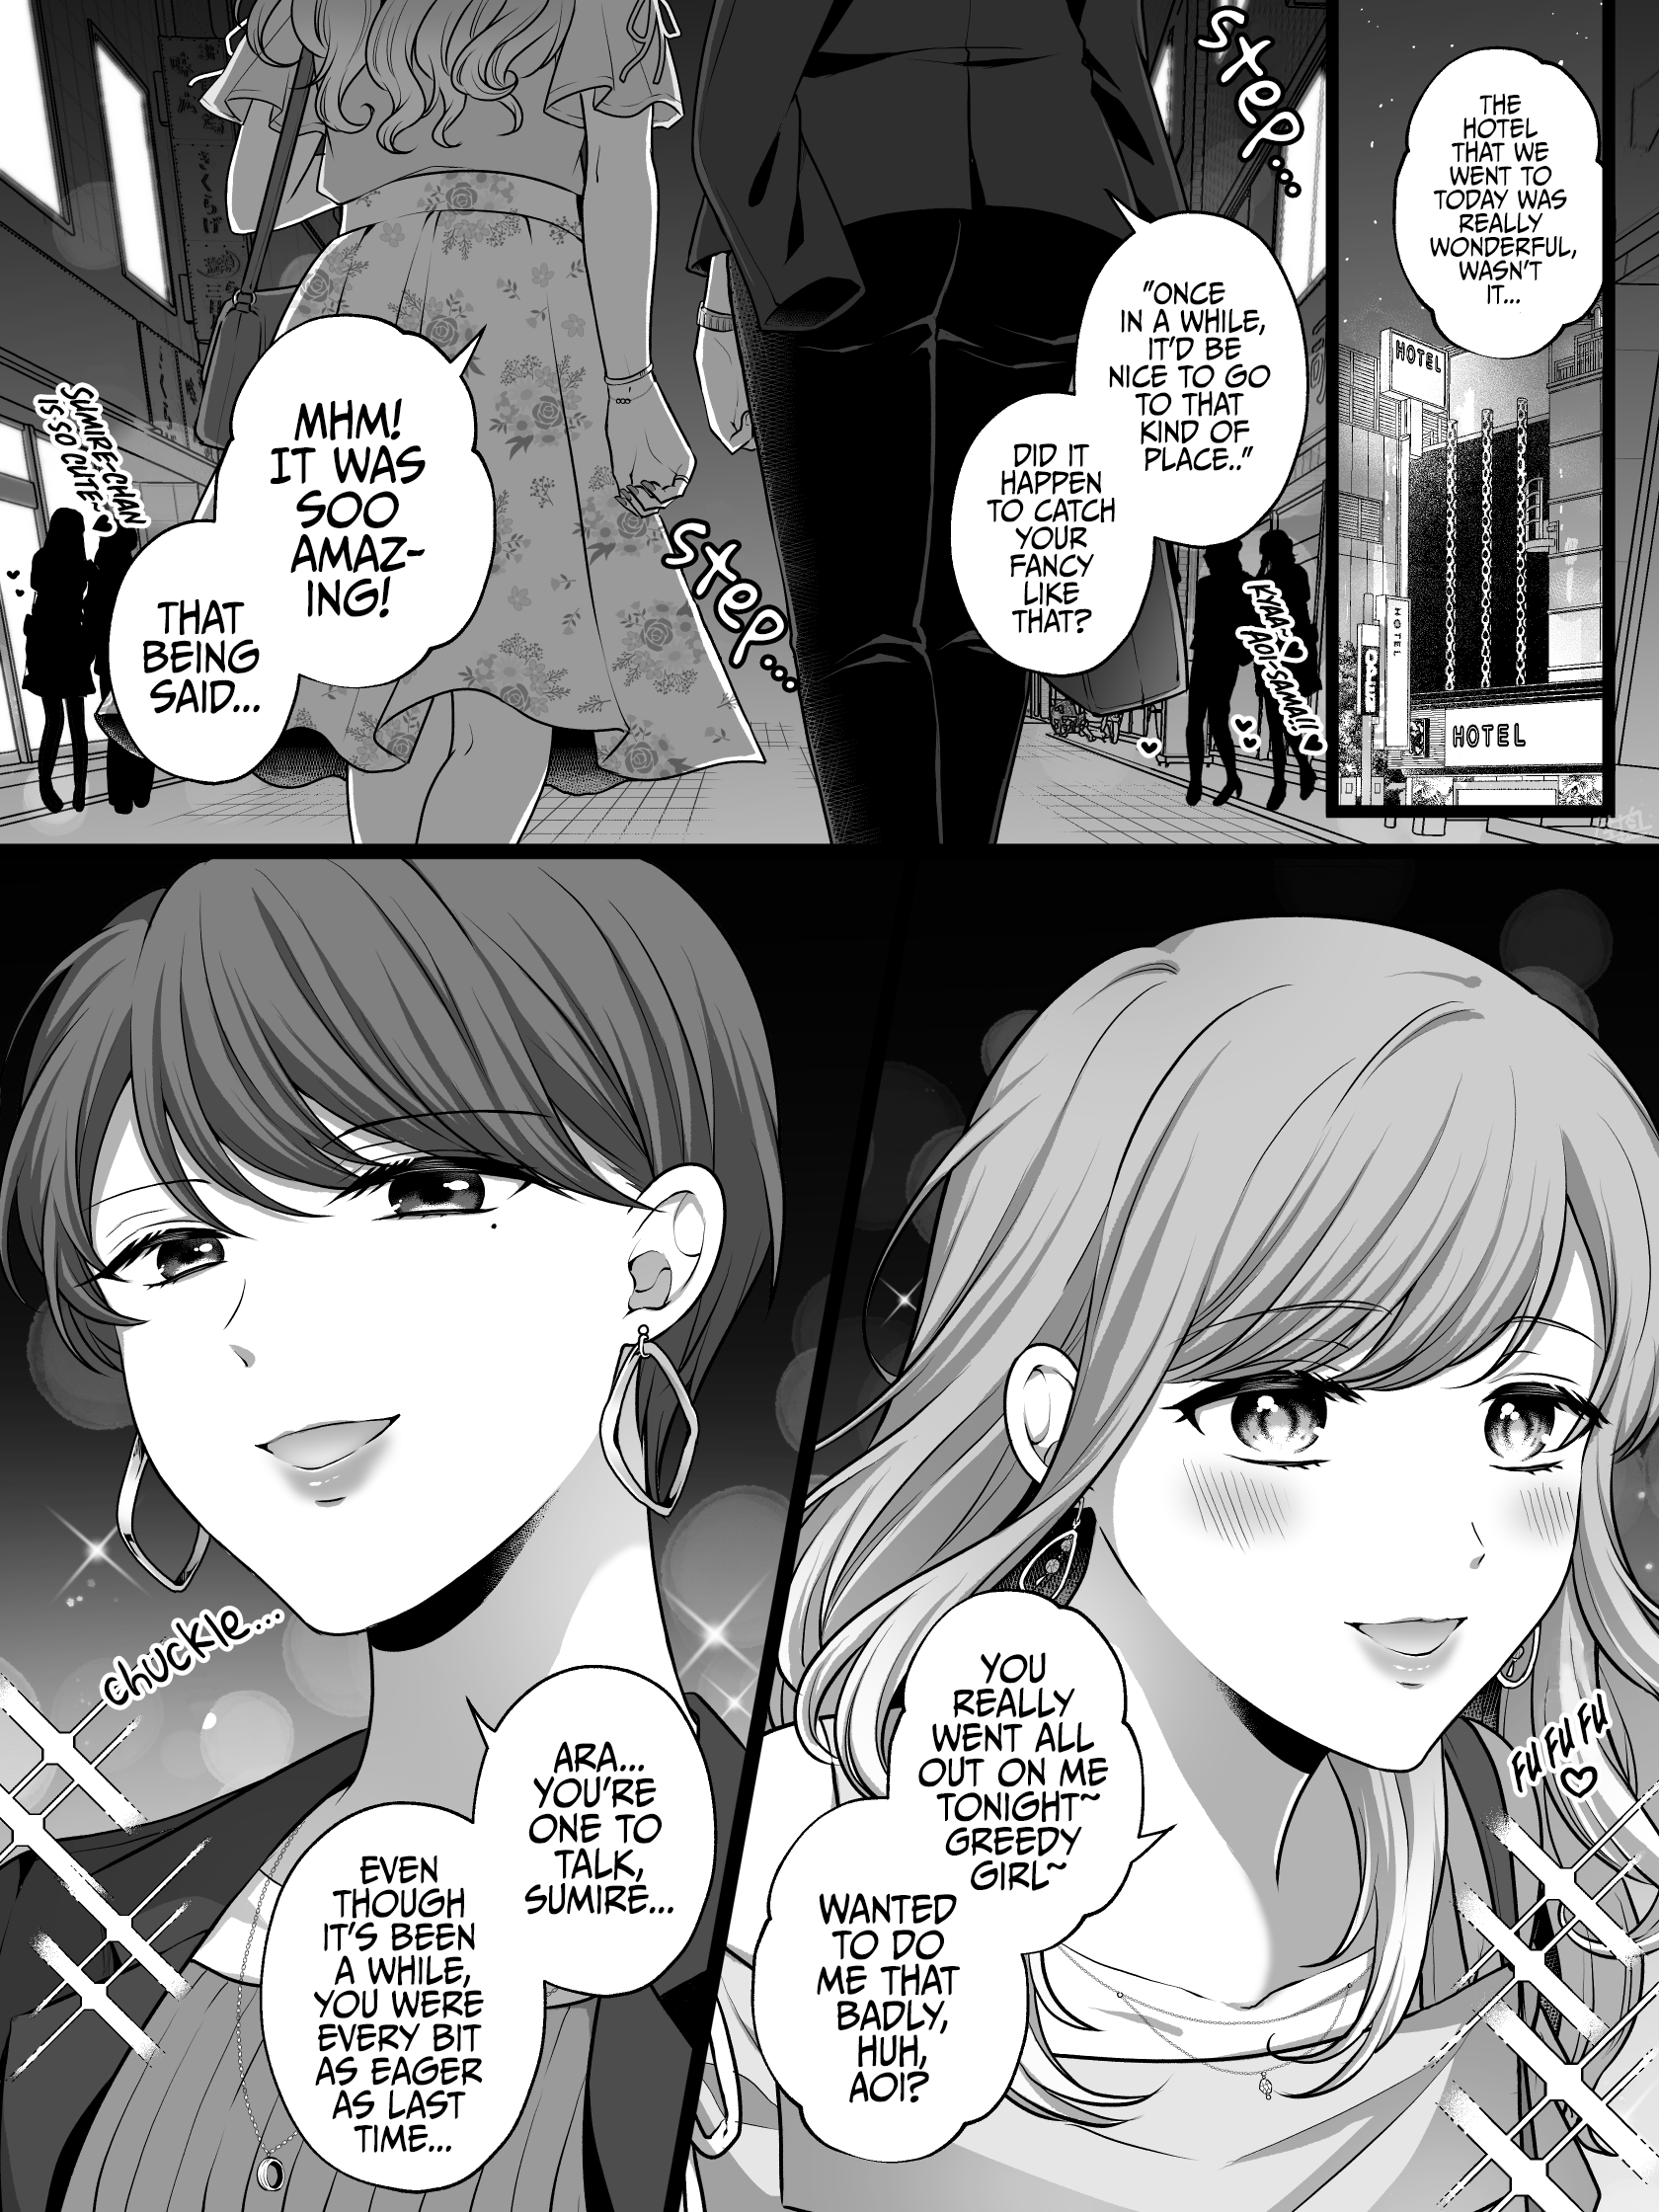 Mutually Unrequited Love Between Sex Friends manga